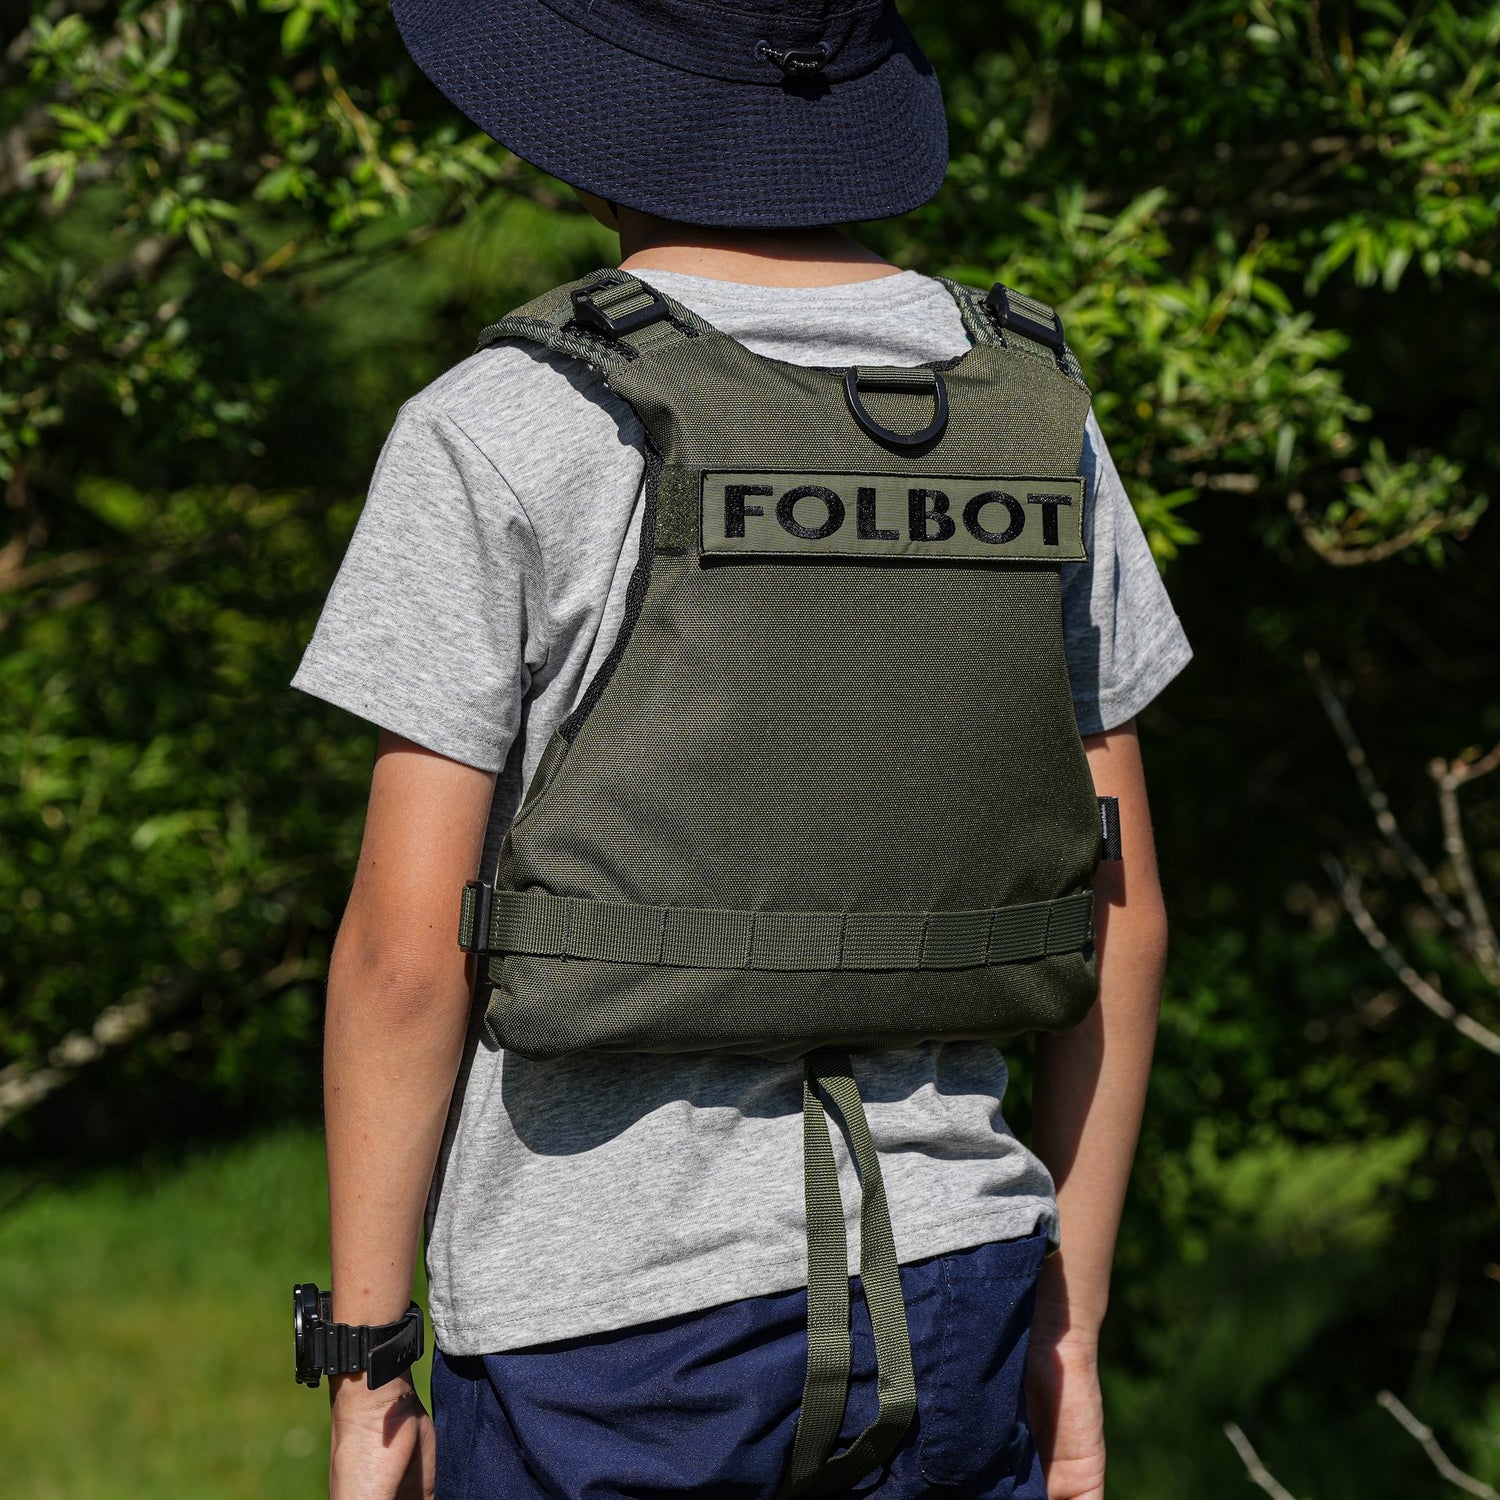 TACTICAL FLOATING DEVICE for KIDS